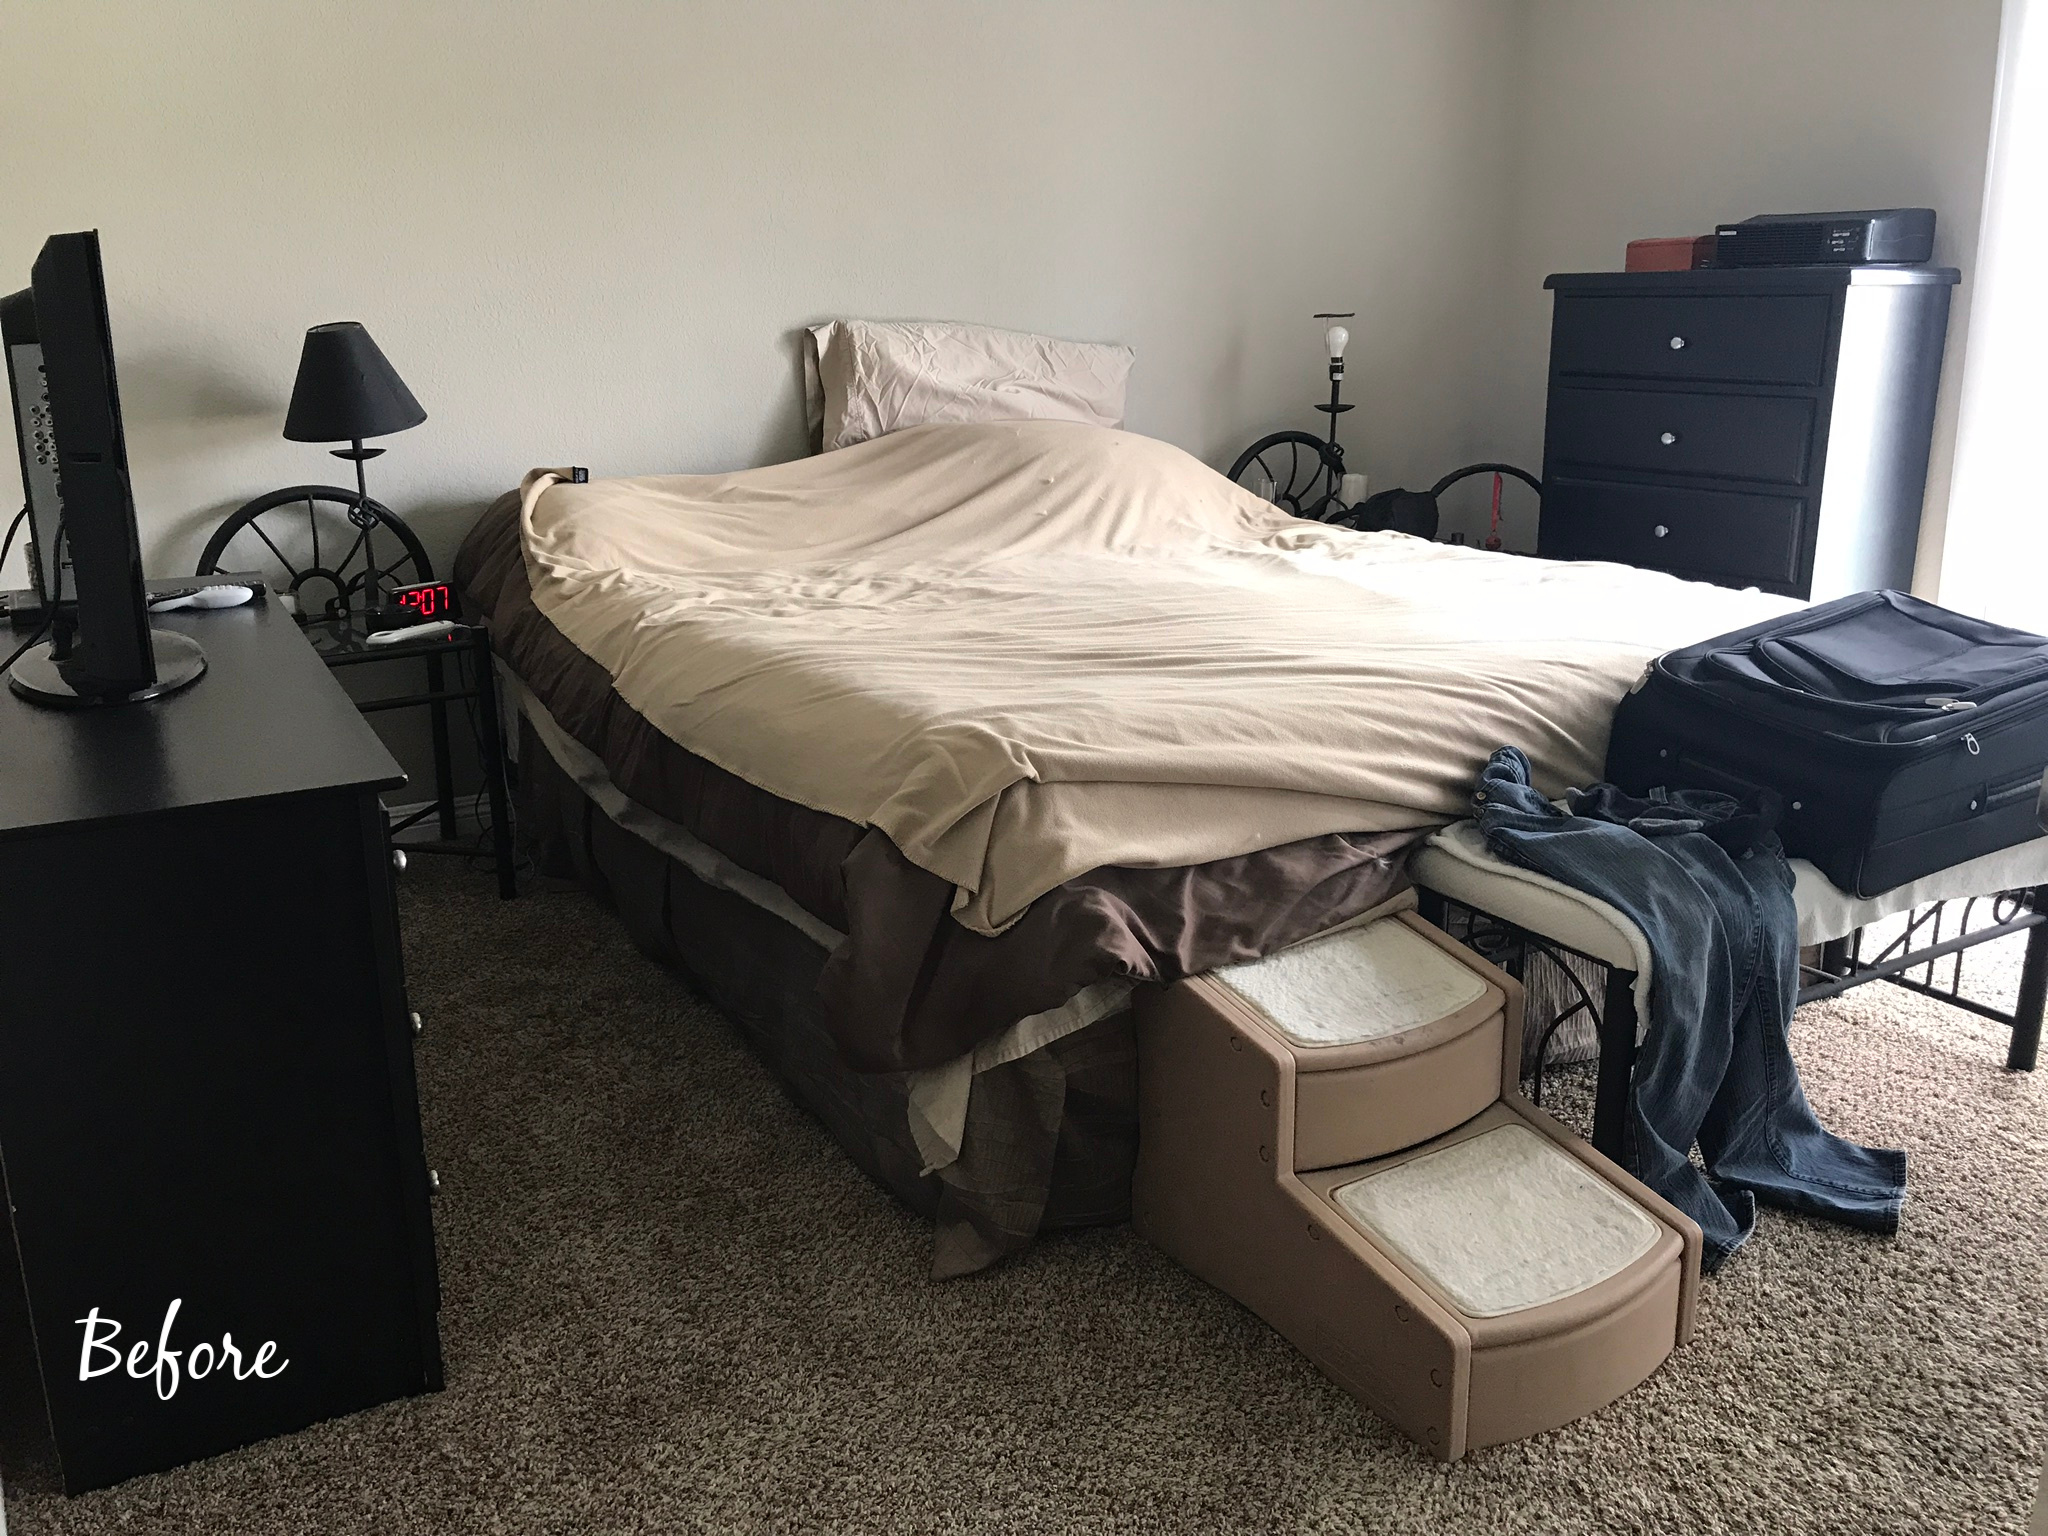 Bedroom Before Home Staging